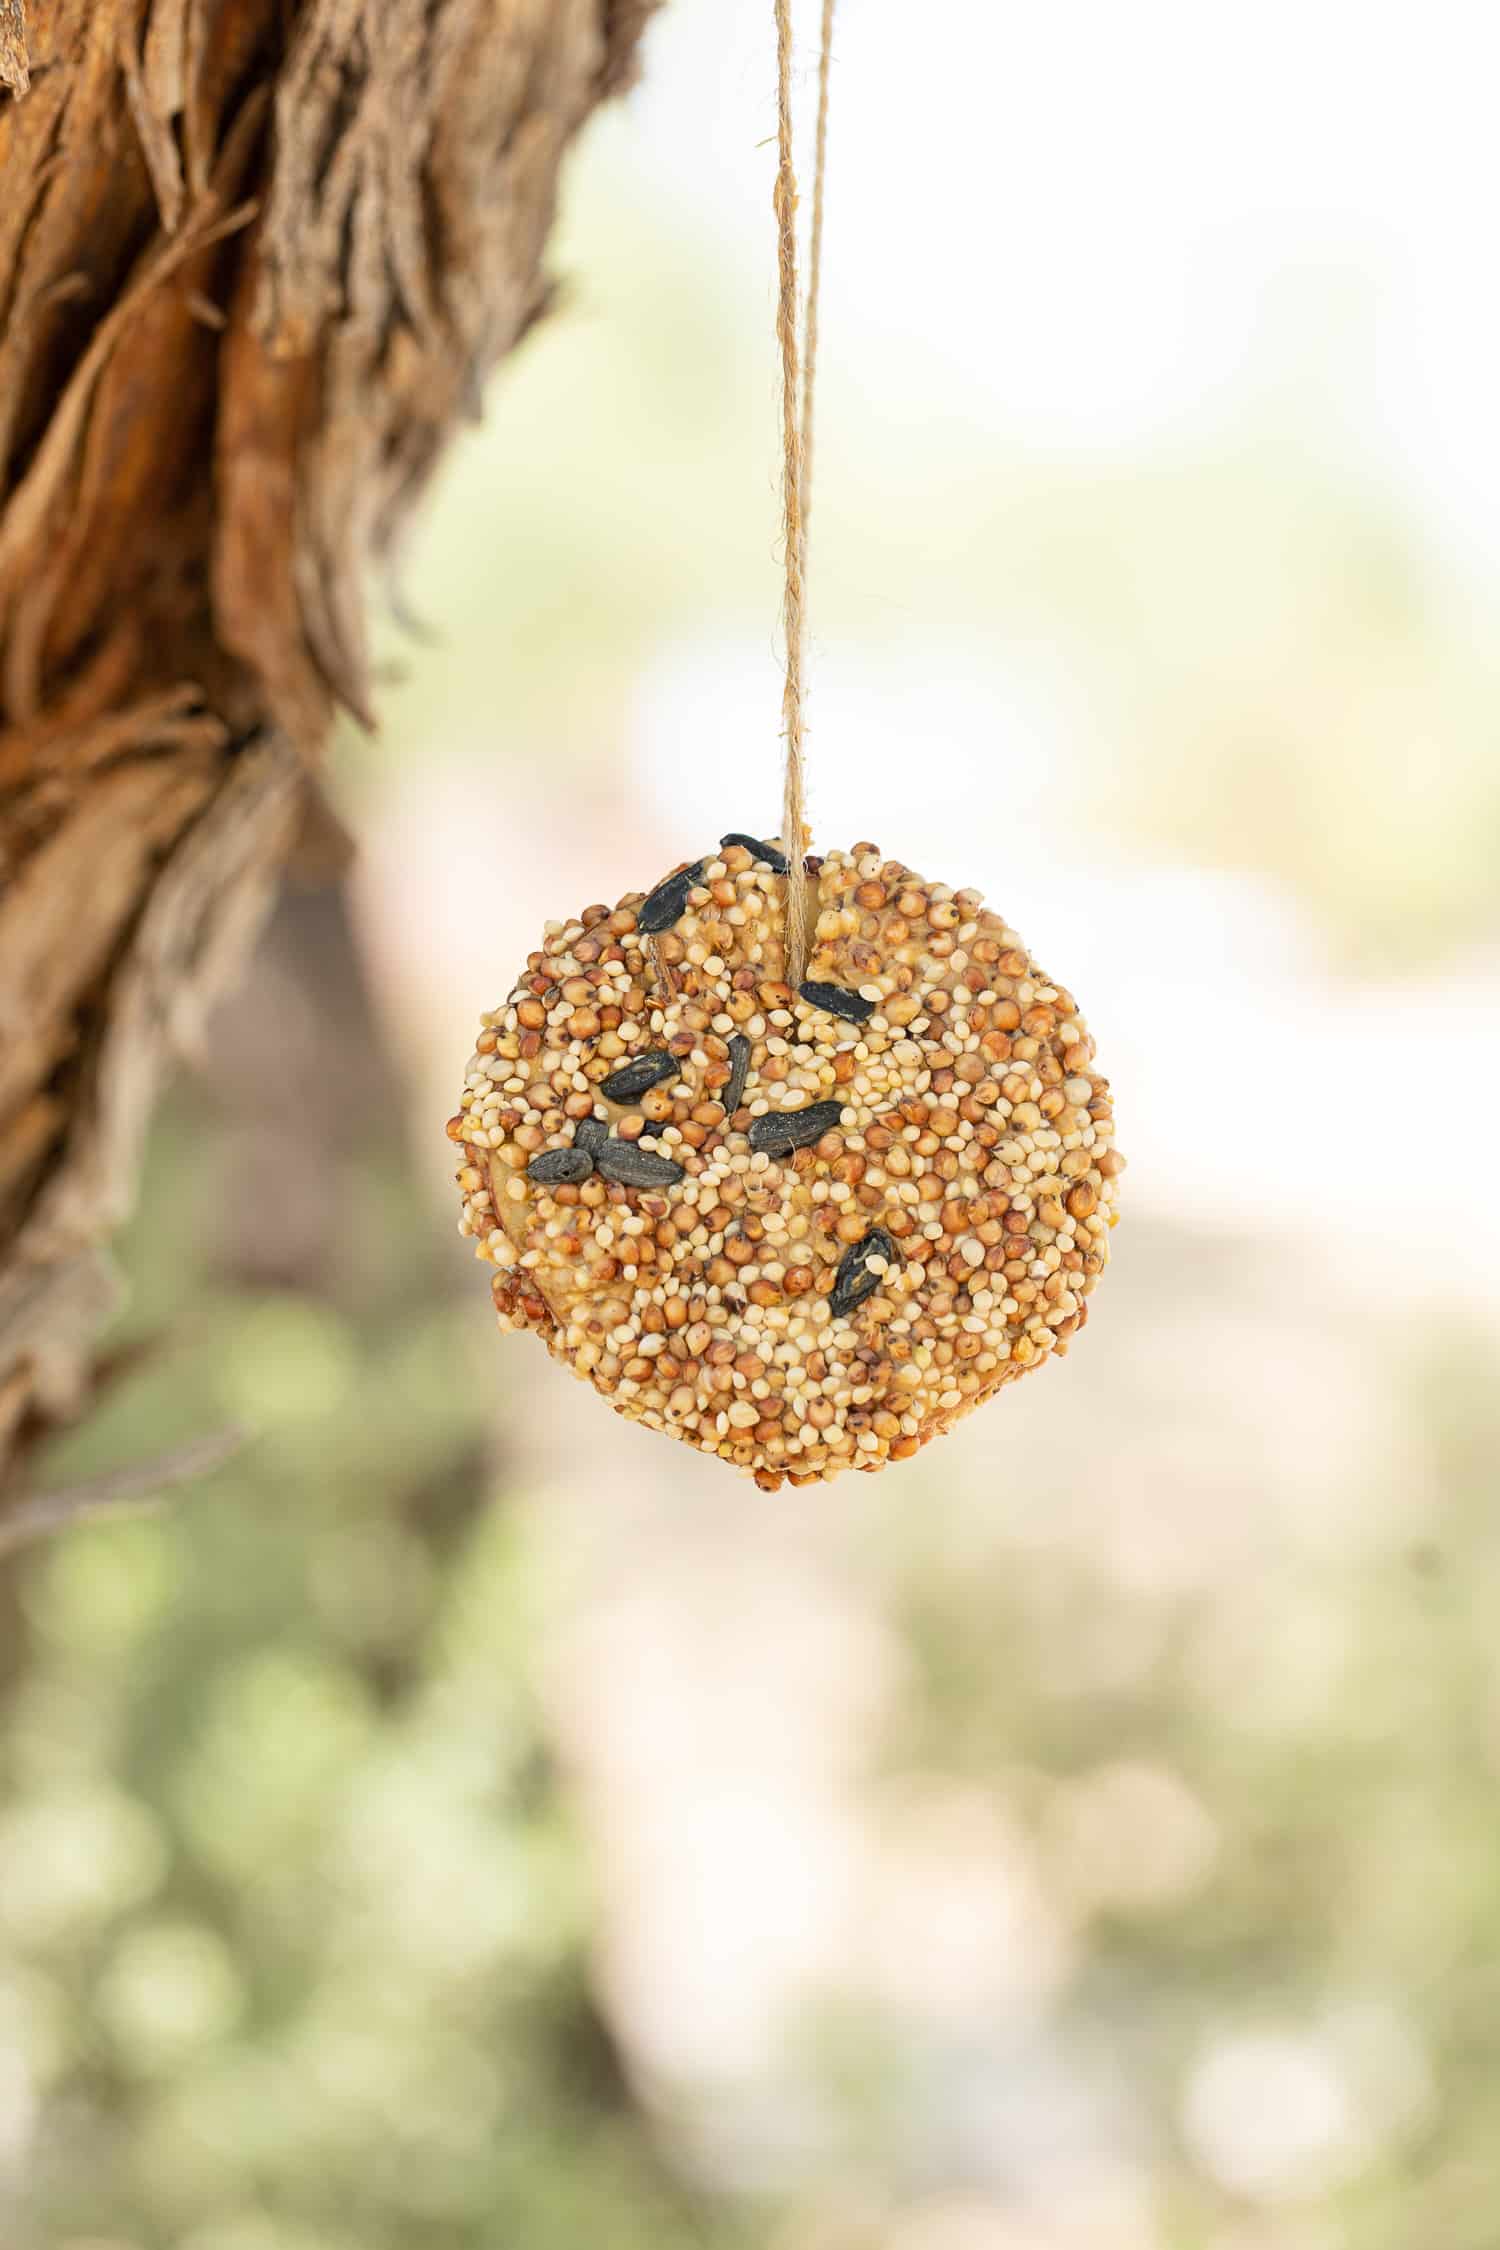 Apple Bird Feeders - Made To Be A Momma